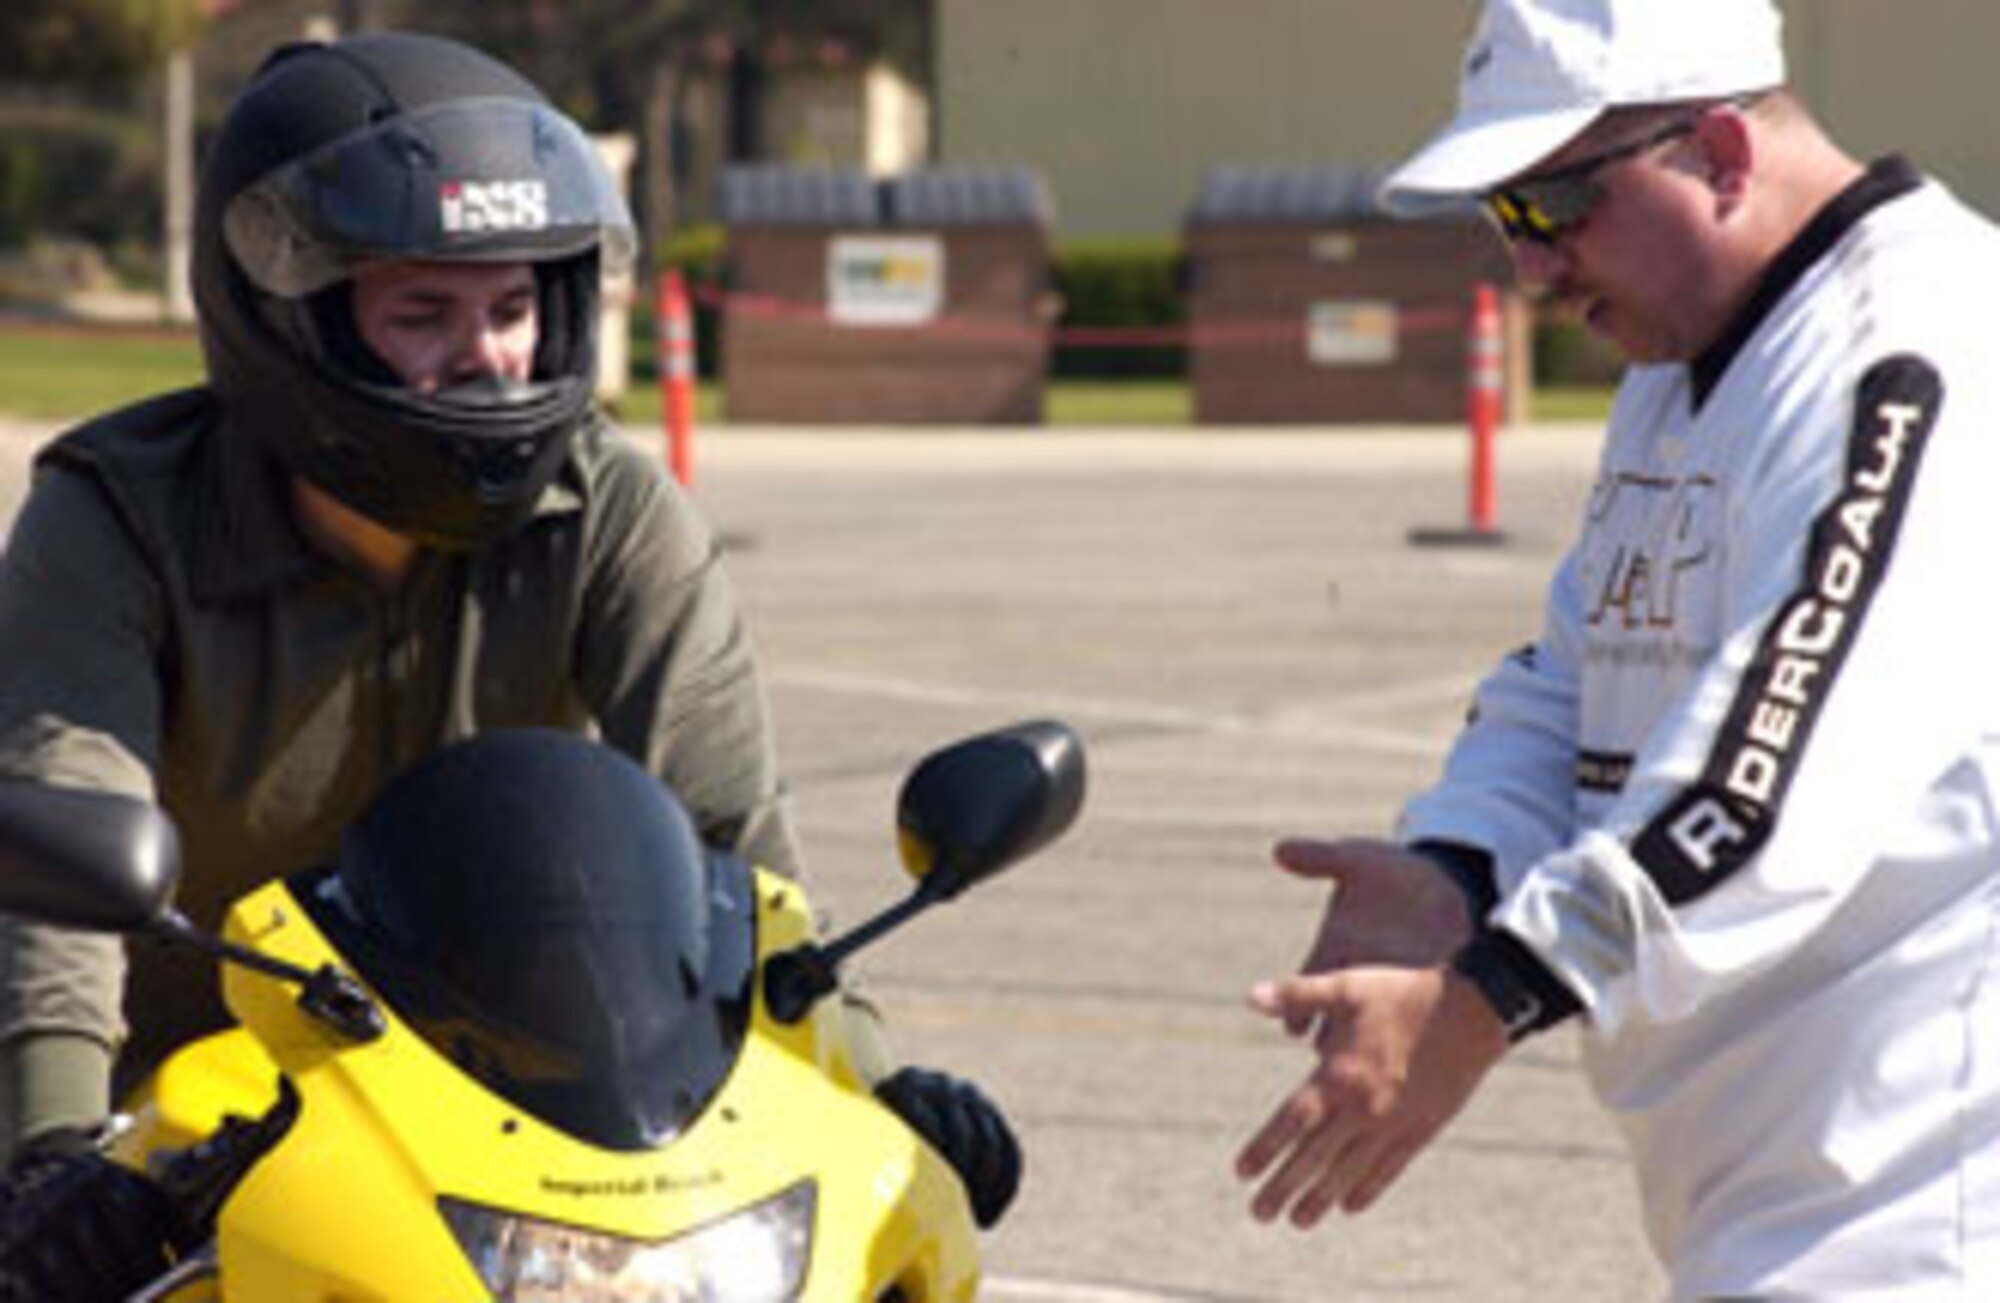 Instructor Gene Reeks gives Senior Airman Jaime Hinojosa-Guzman,
452nd LRS, some tips while riding the beginning motorcycle rider's course at March Air Reserve Base.  (U.S. Air Force photo by Staff Sgt. Amy Abbott)